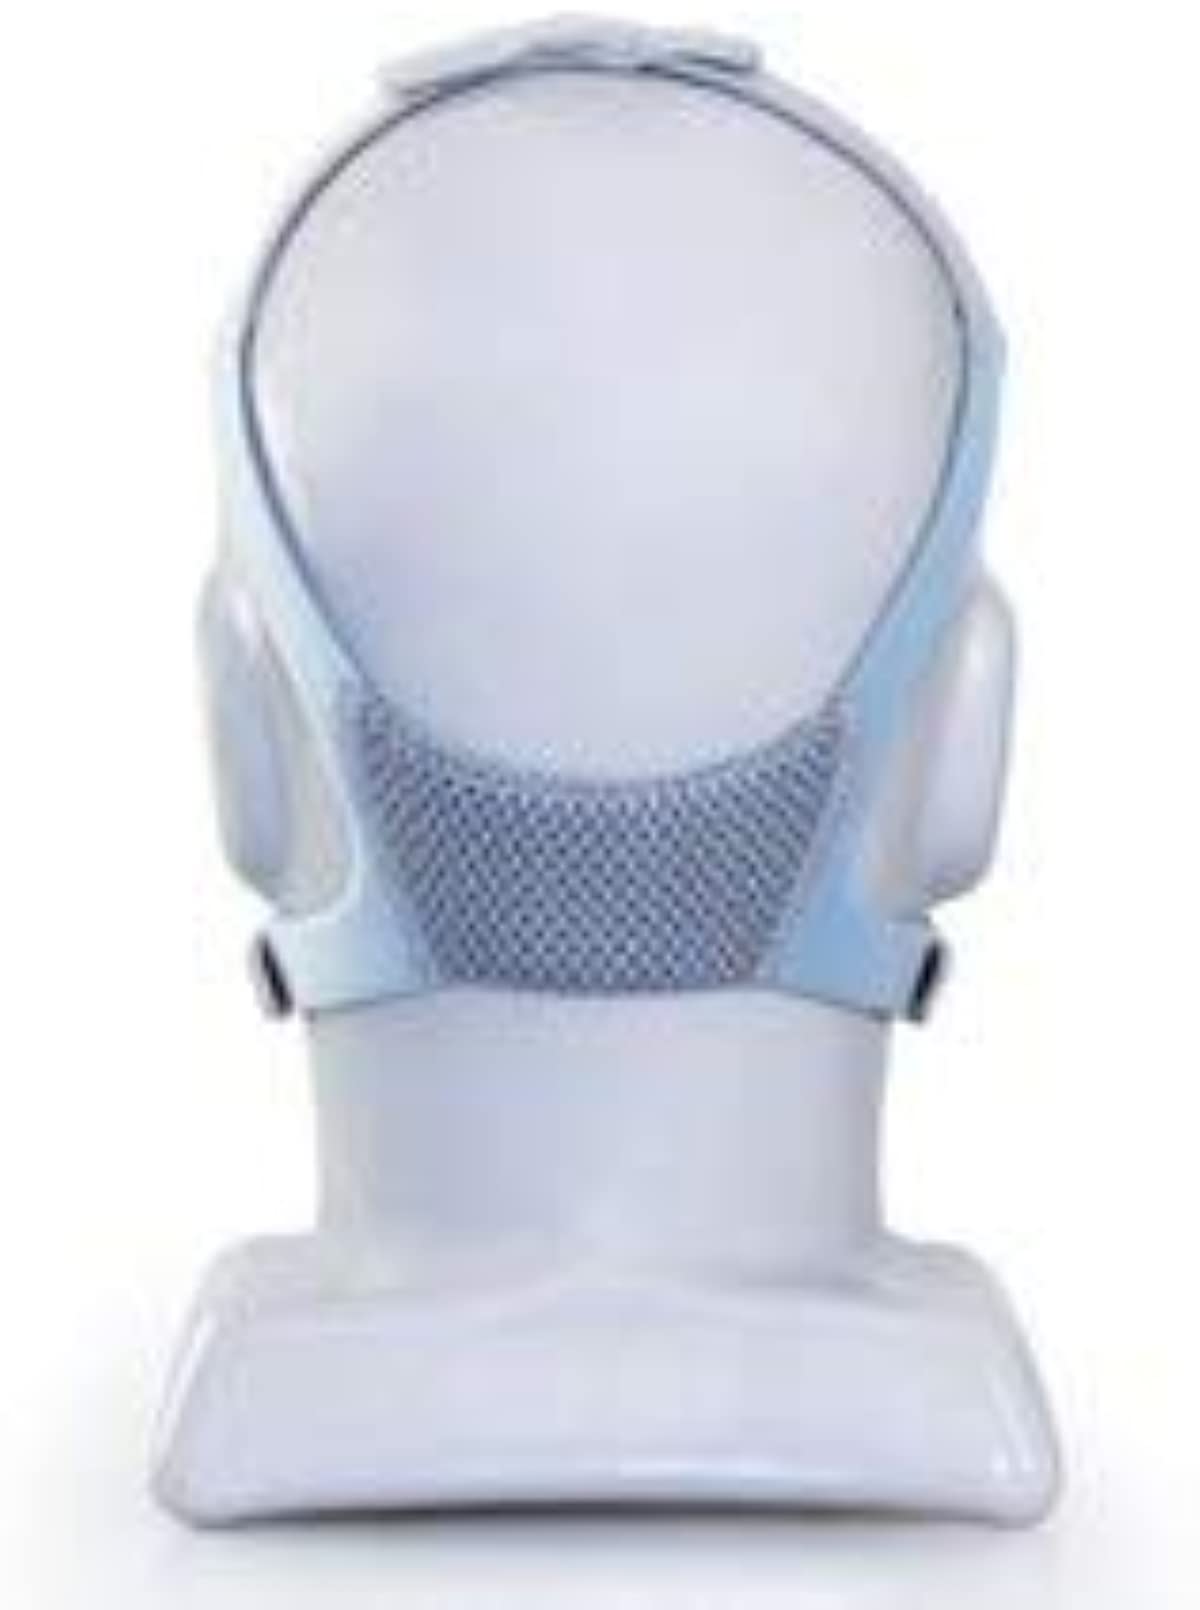 Vitera Headgear Small Spare - 400VIT121 - Fisher & Paykel - Cpap Supplies Headgear - Only Headgear Included